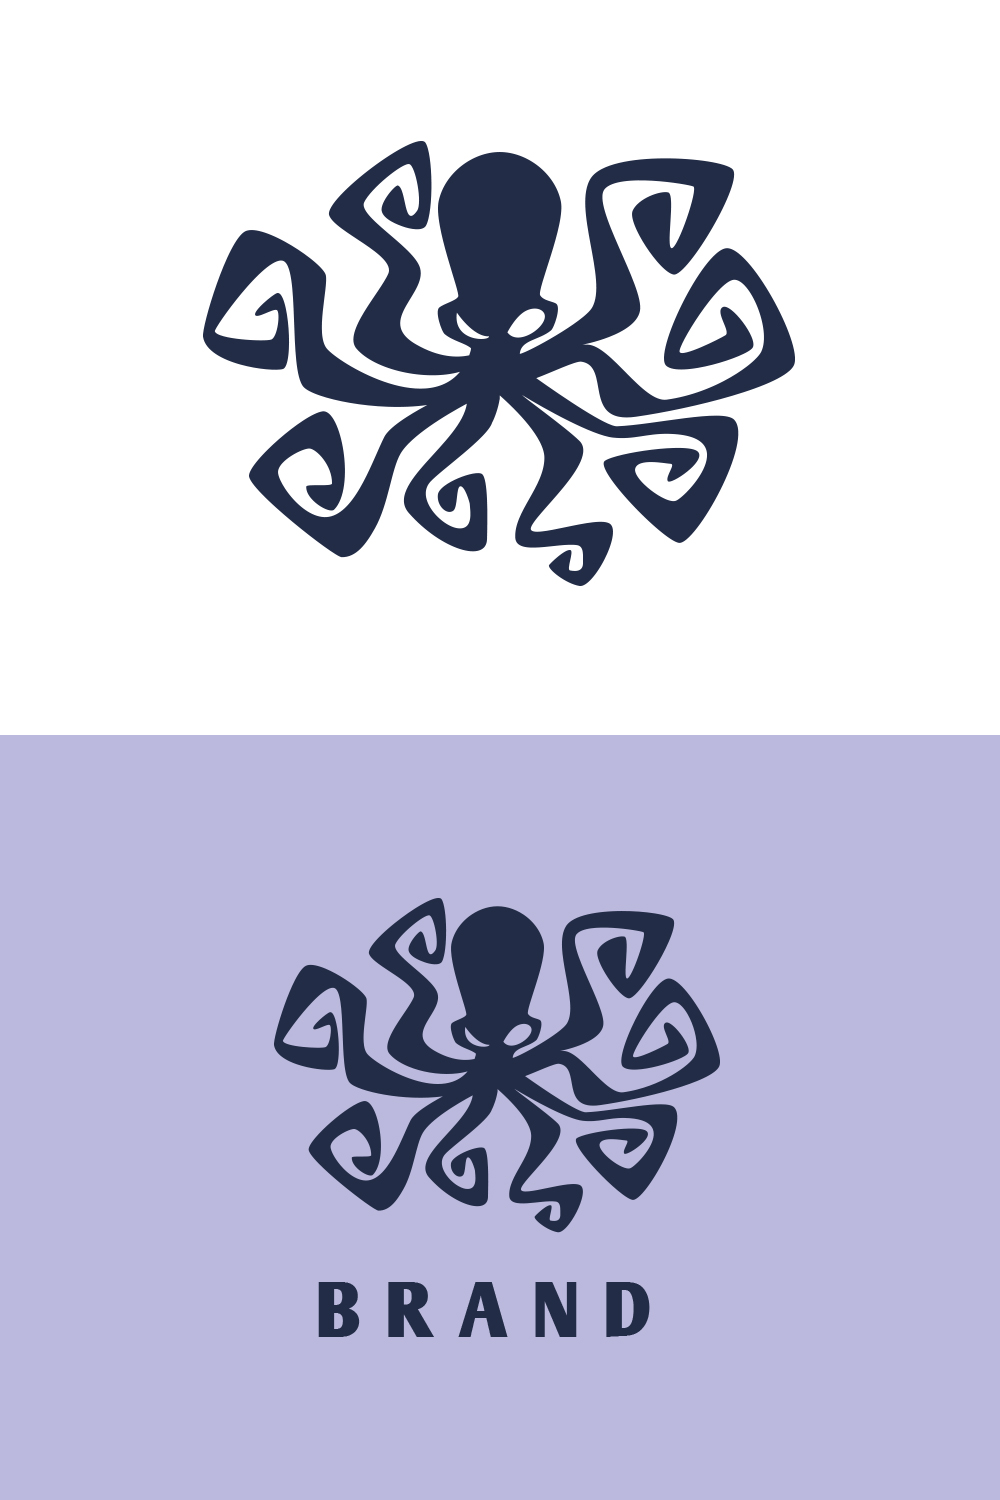 Octopus Logo Vector Images (over 7,900)